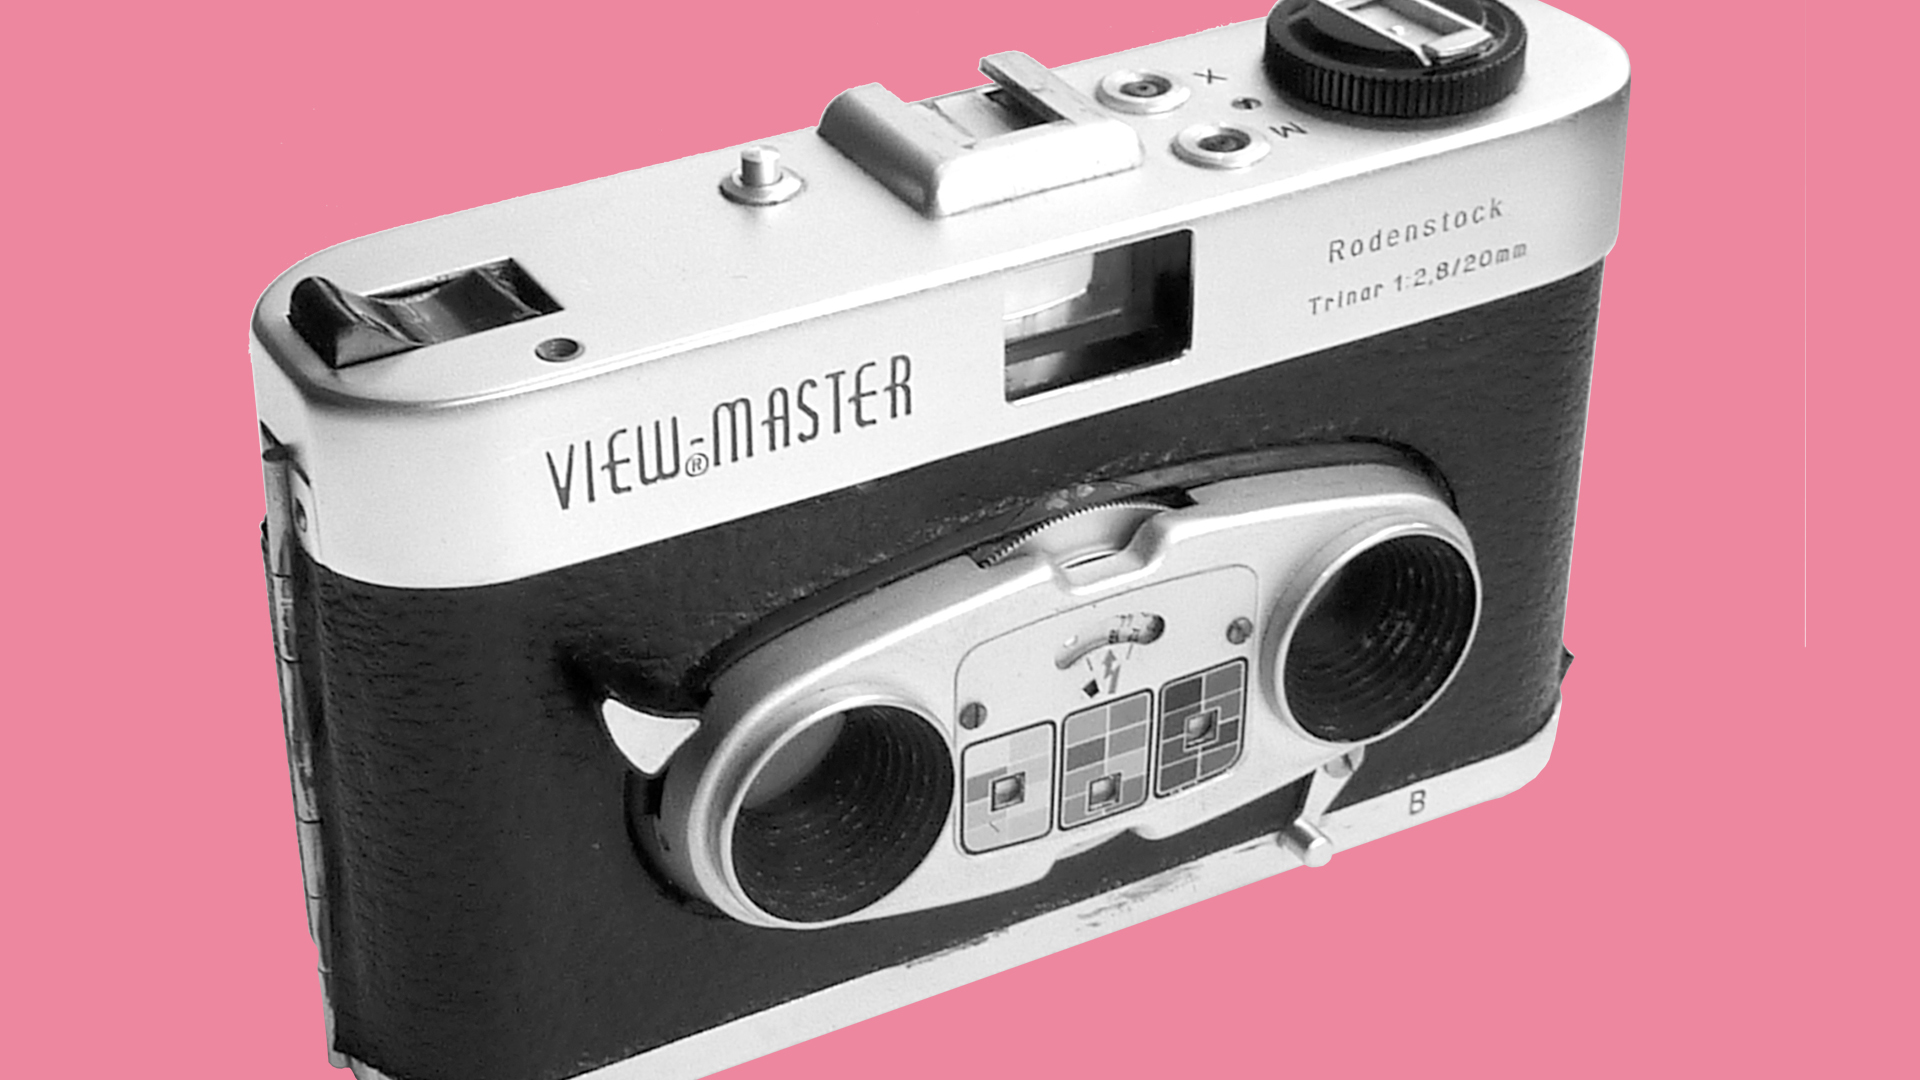 The front of the View-Master Stereo camera on a pink background